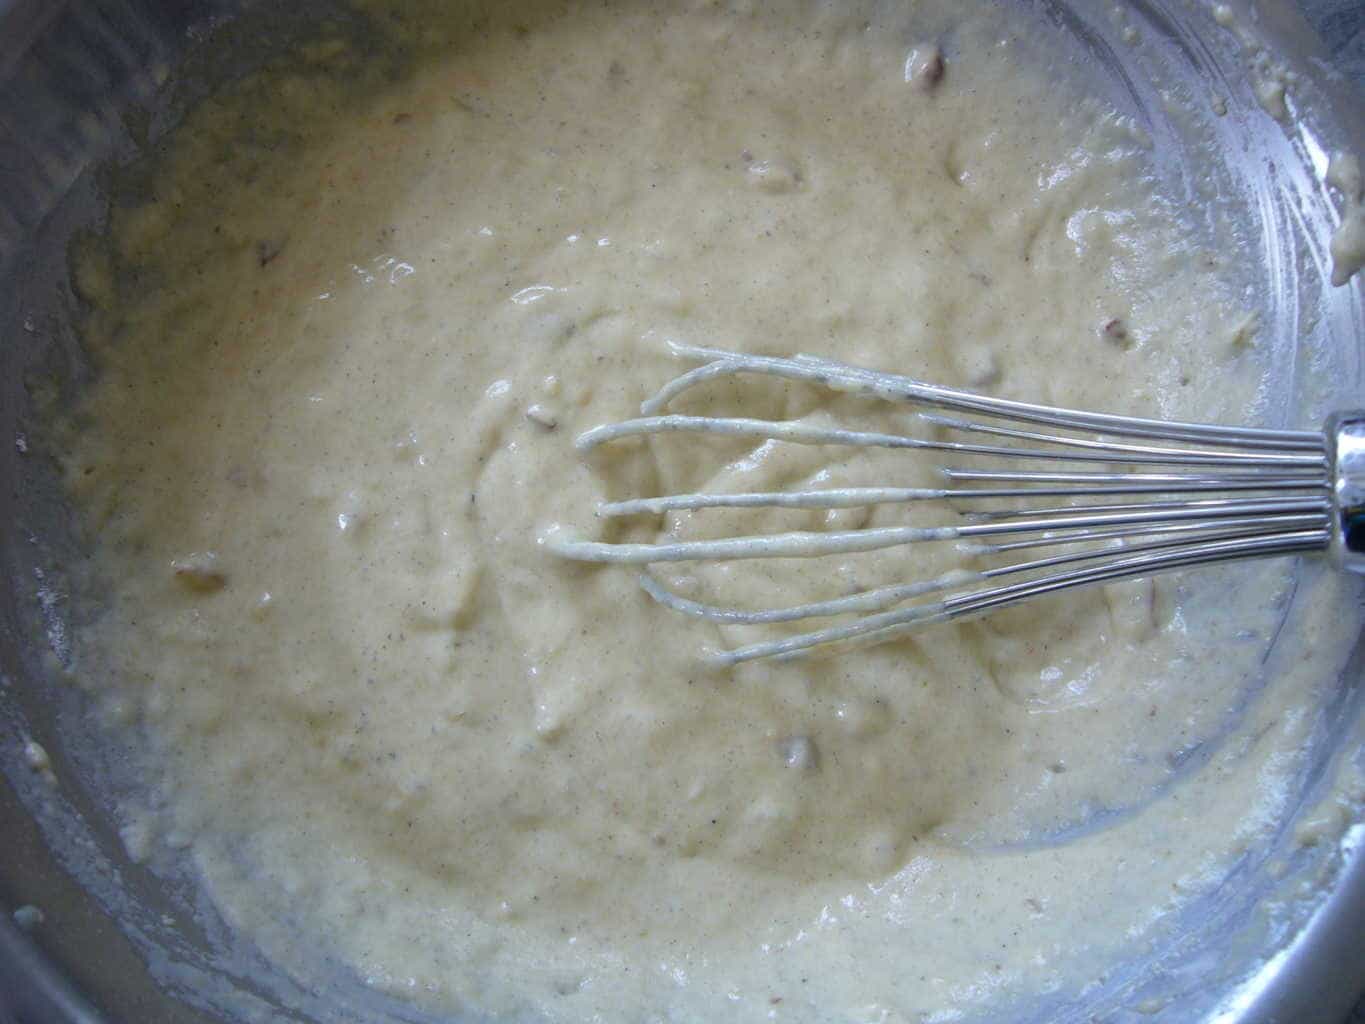 Wet and dry ingredients combined for making the pancakes